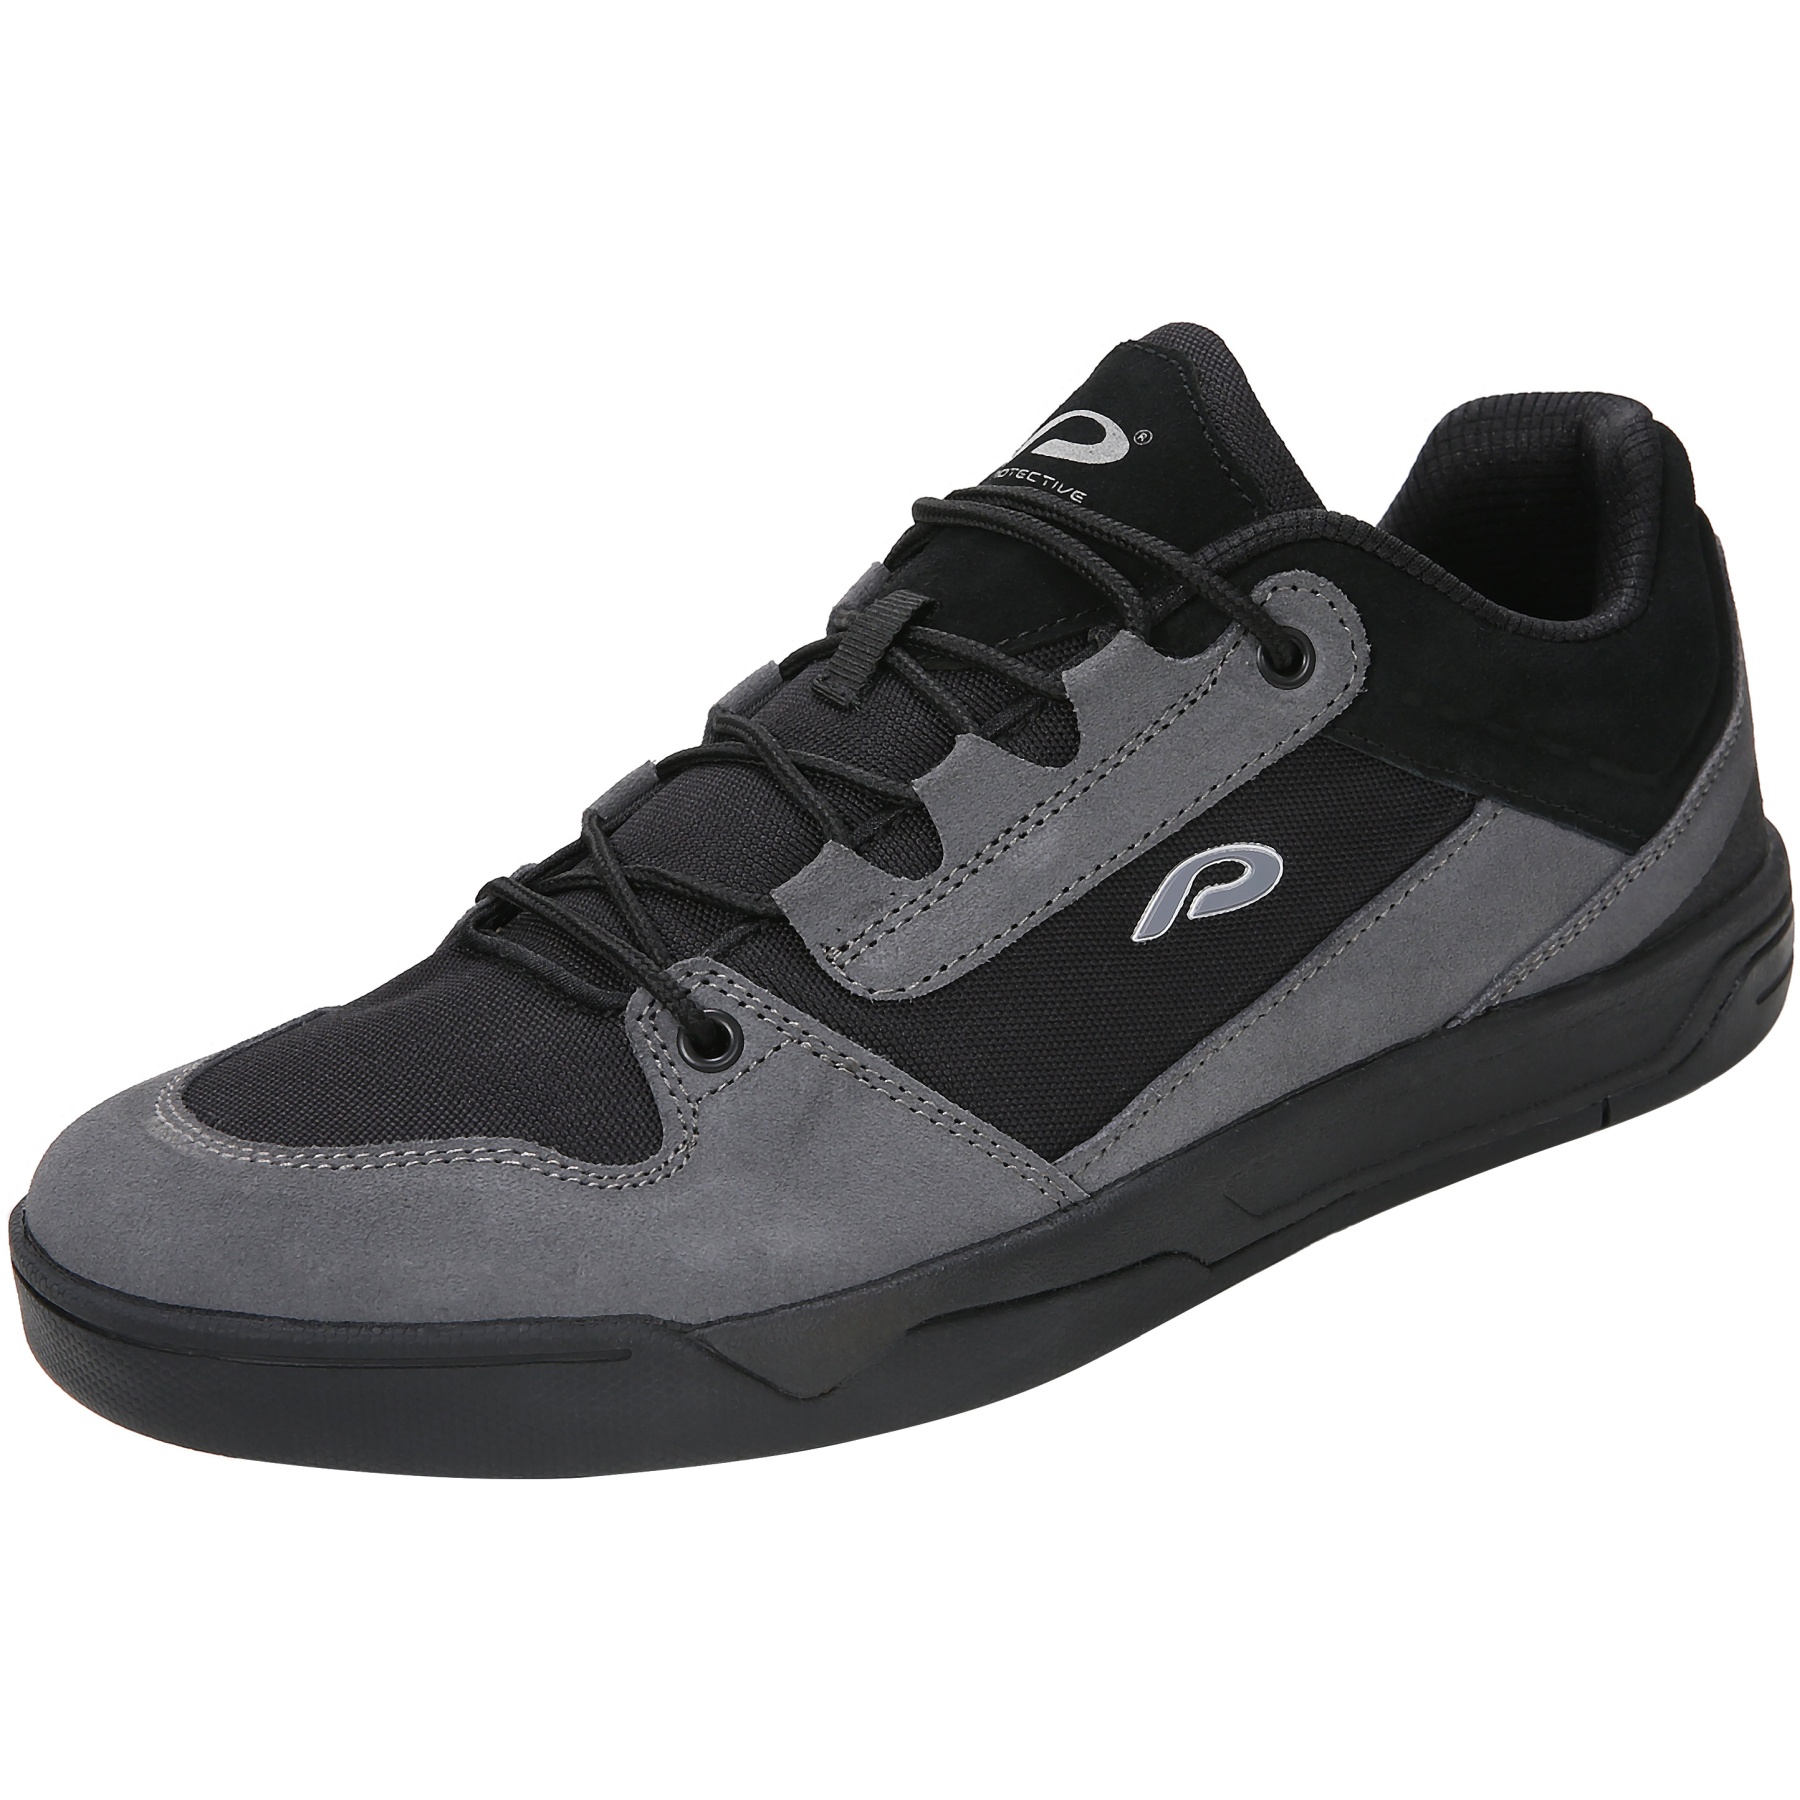 Picture of PROTECTIVE P-Skids Shoes Unisex - black